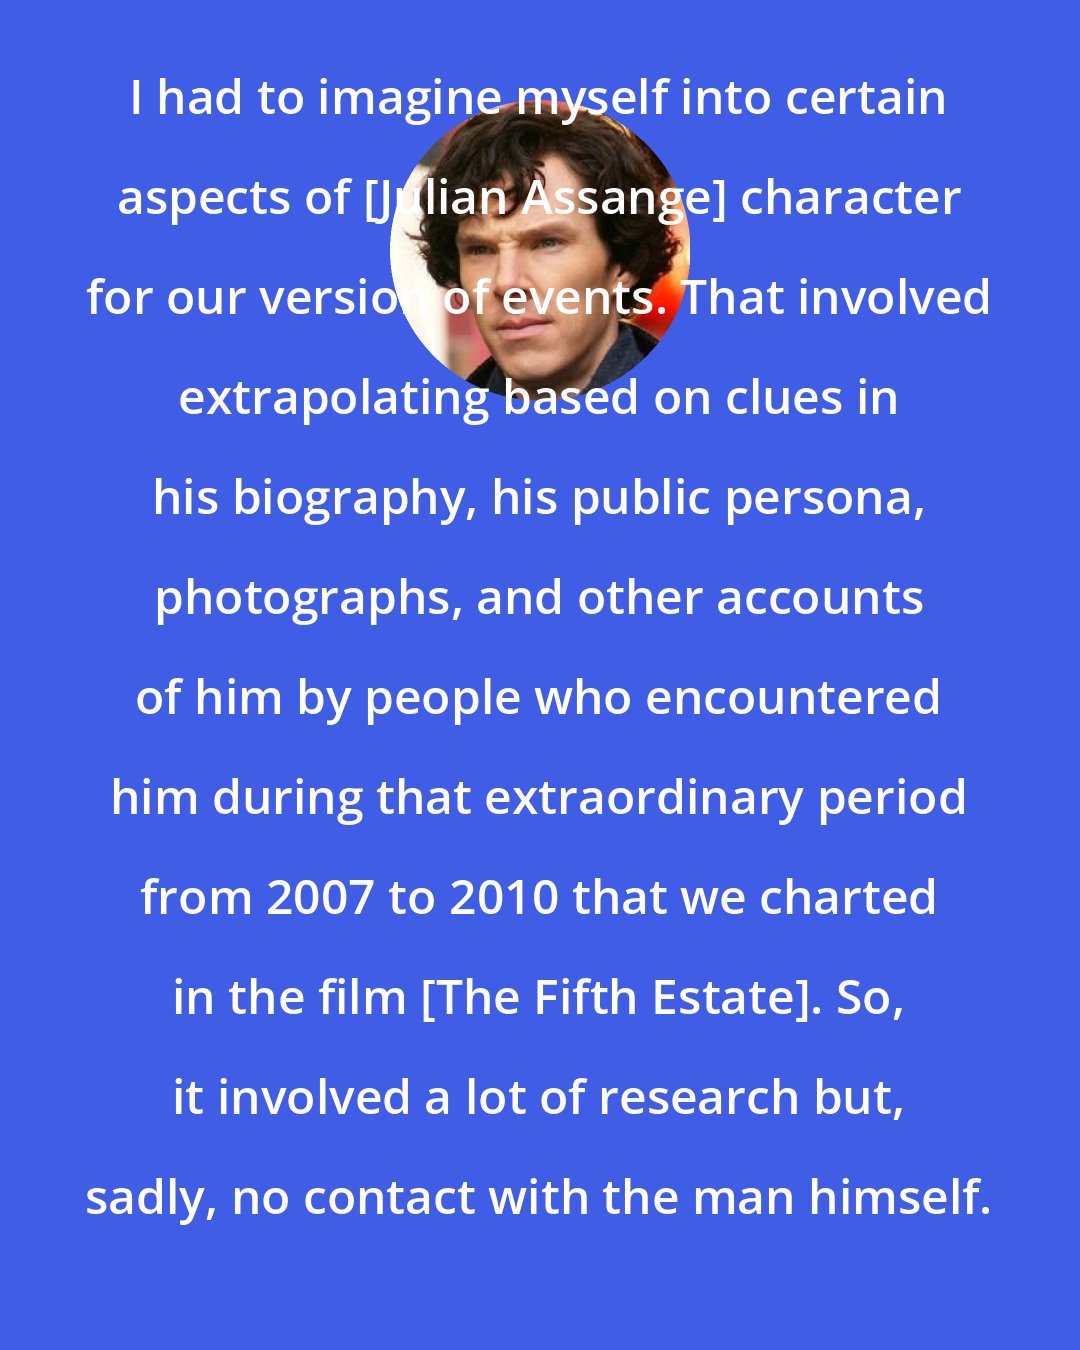 Benedict Cumberbatch: I had to imagine myself into certain aspects of [Julian Assange] character for our version of events. That involved extrapolating based on clues in his biography, his public persona, photographs, and other accounts of him by people who encountered him during that extraordinary period from 2007 to 2010 that we charted in the film [The Fifth Estate]. So, it involved a lot of research but, sadly, no contact with the man himself.